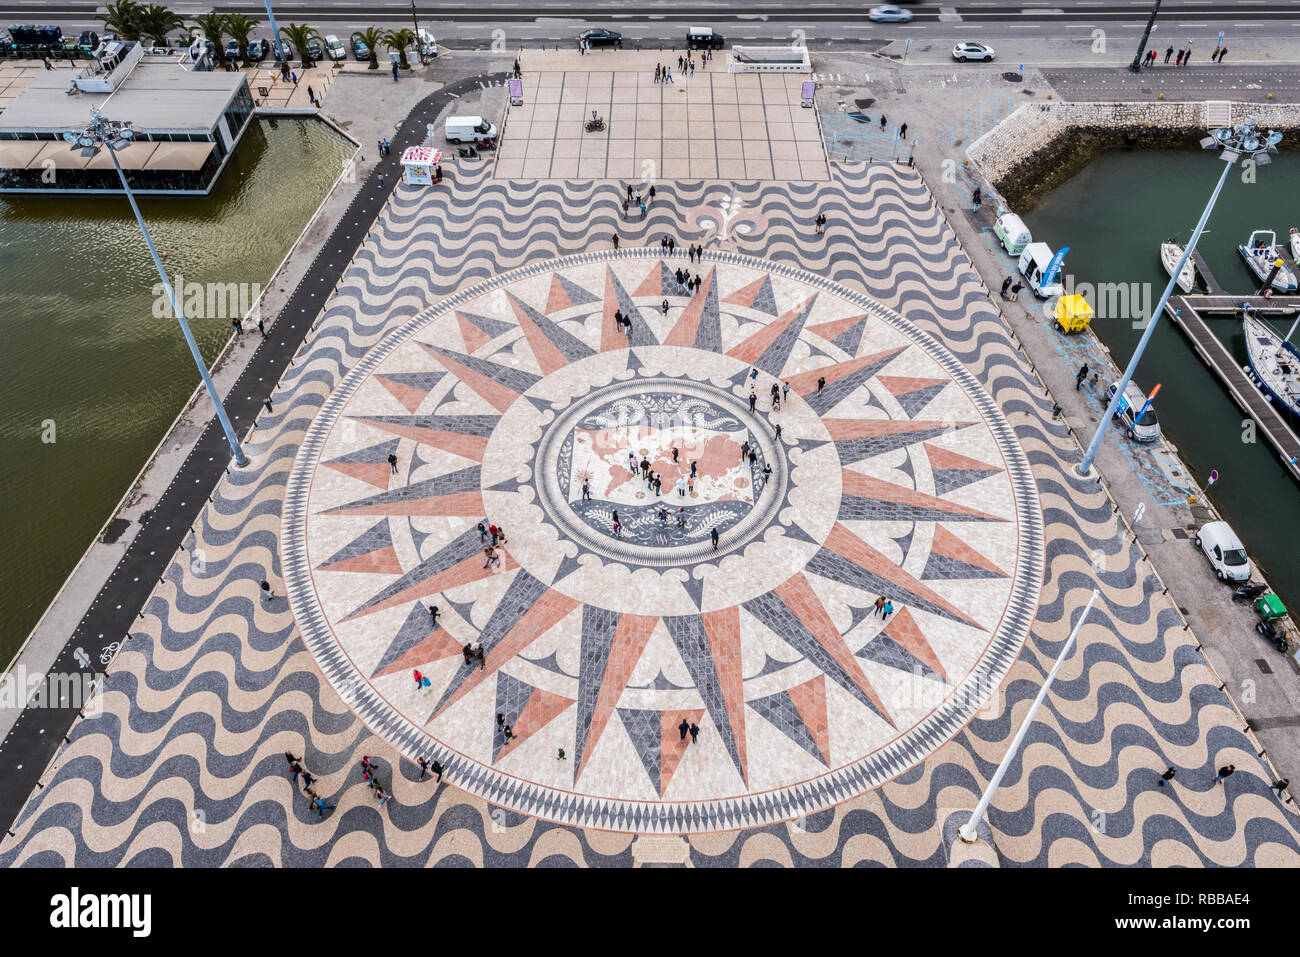 The wind rose on the square of the monument to the discoveries in Lisbon Stock Photo